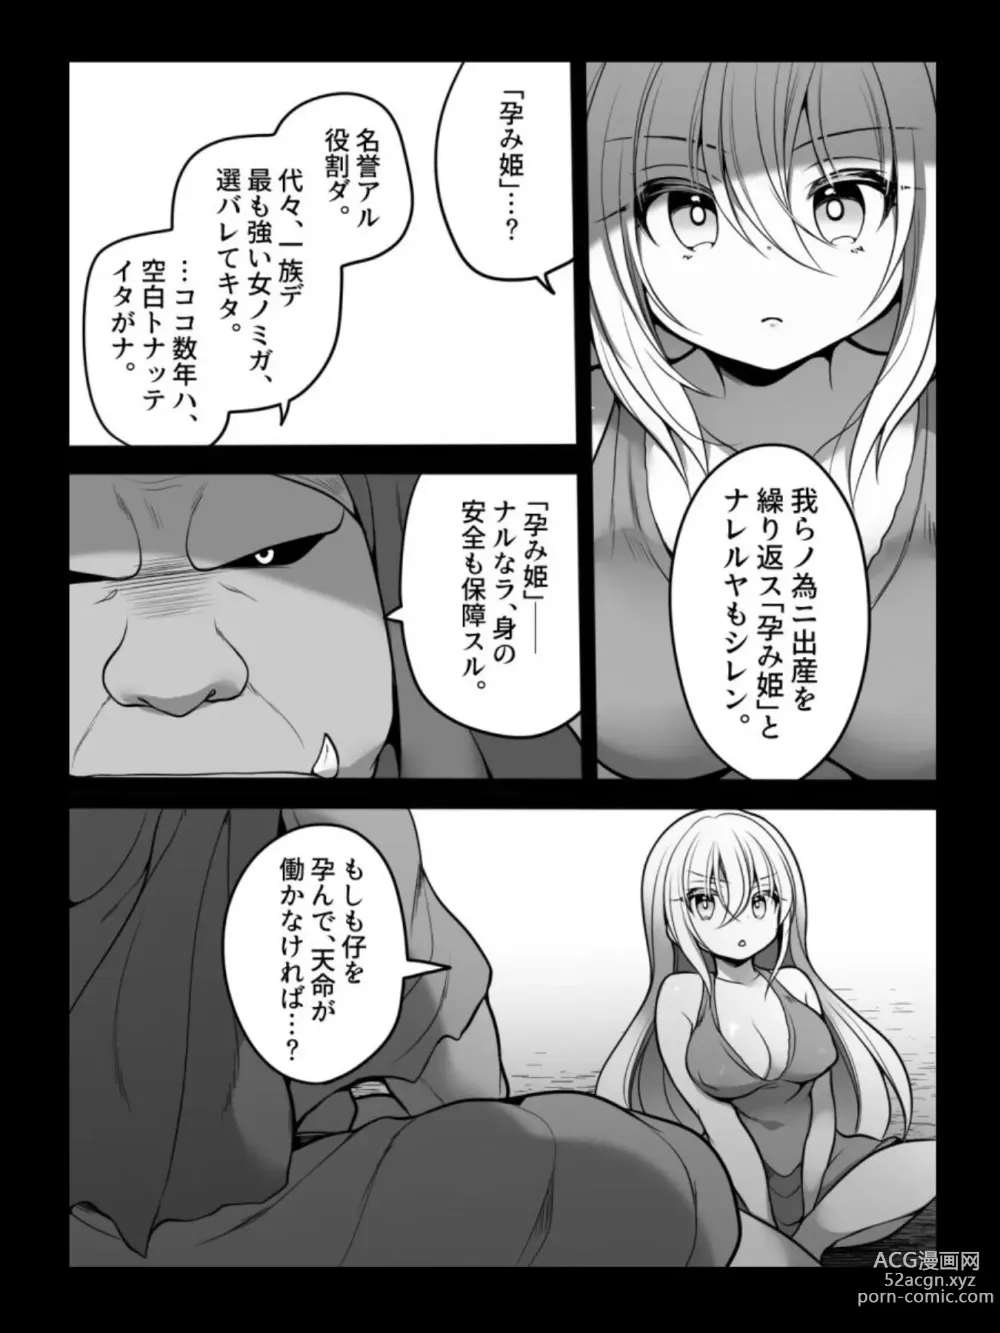 Page 14 of doujinshi TS Impregnated Princess ~A story about a former hero who becomes the princess of a group of orcs~